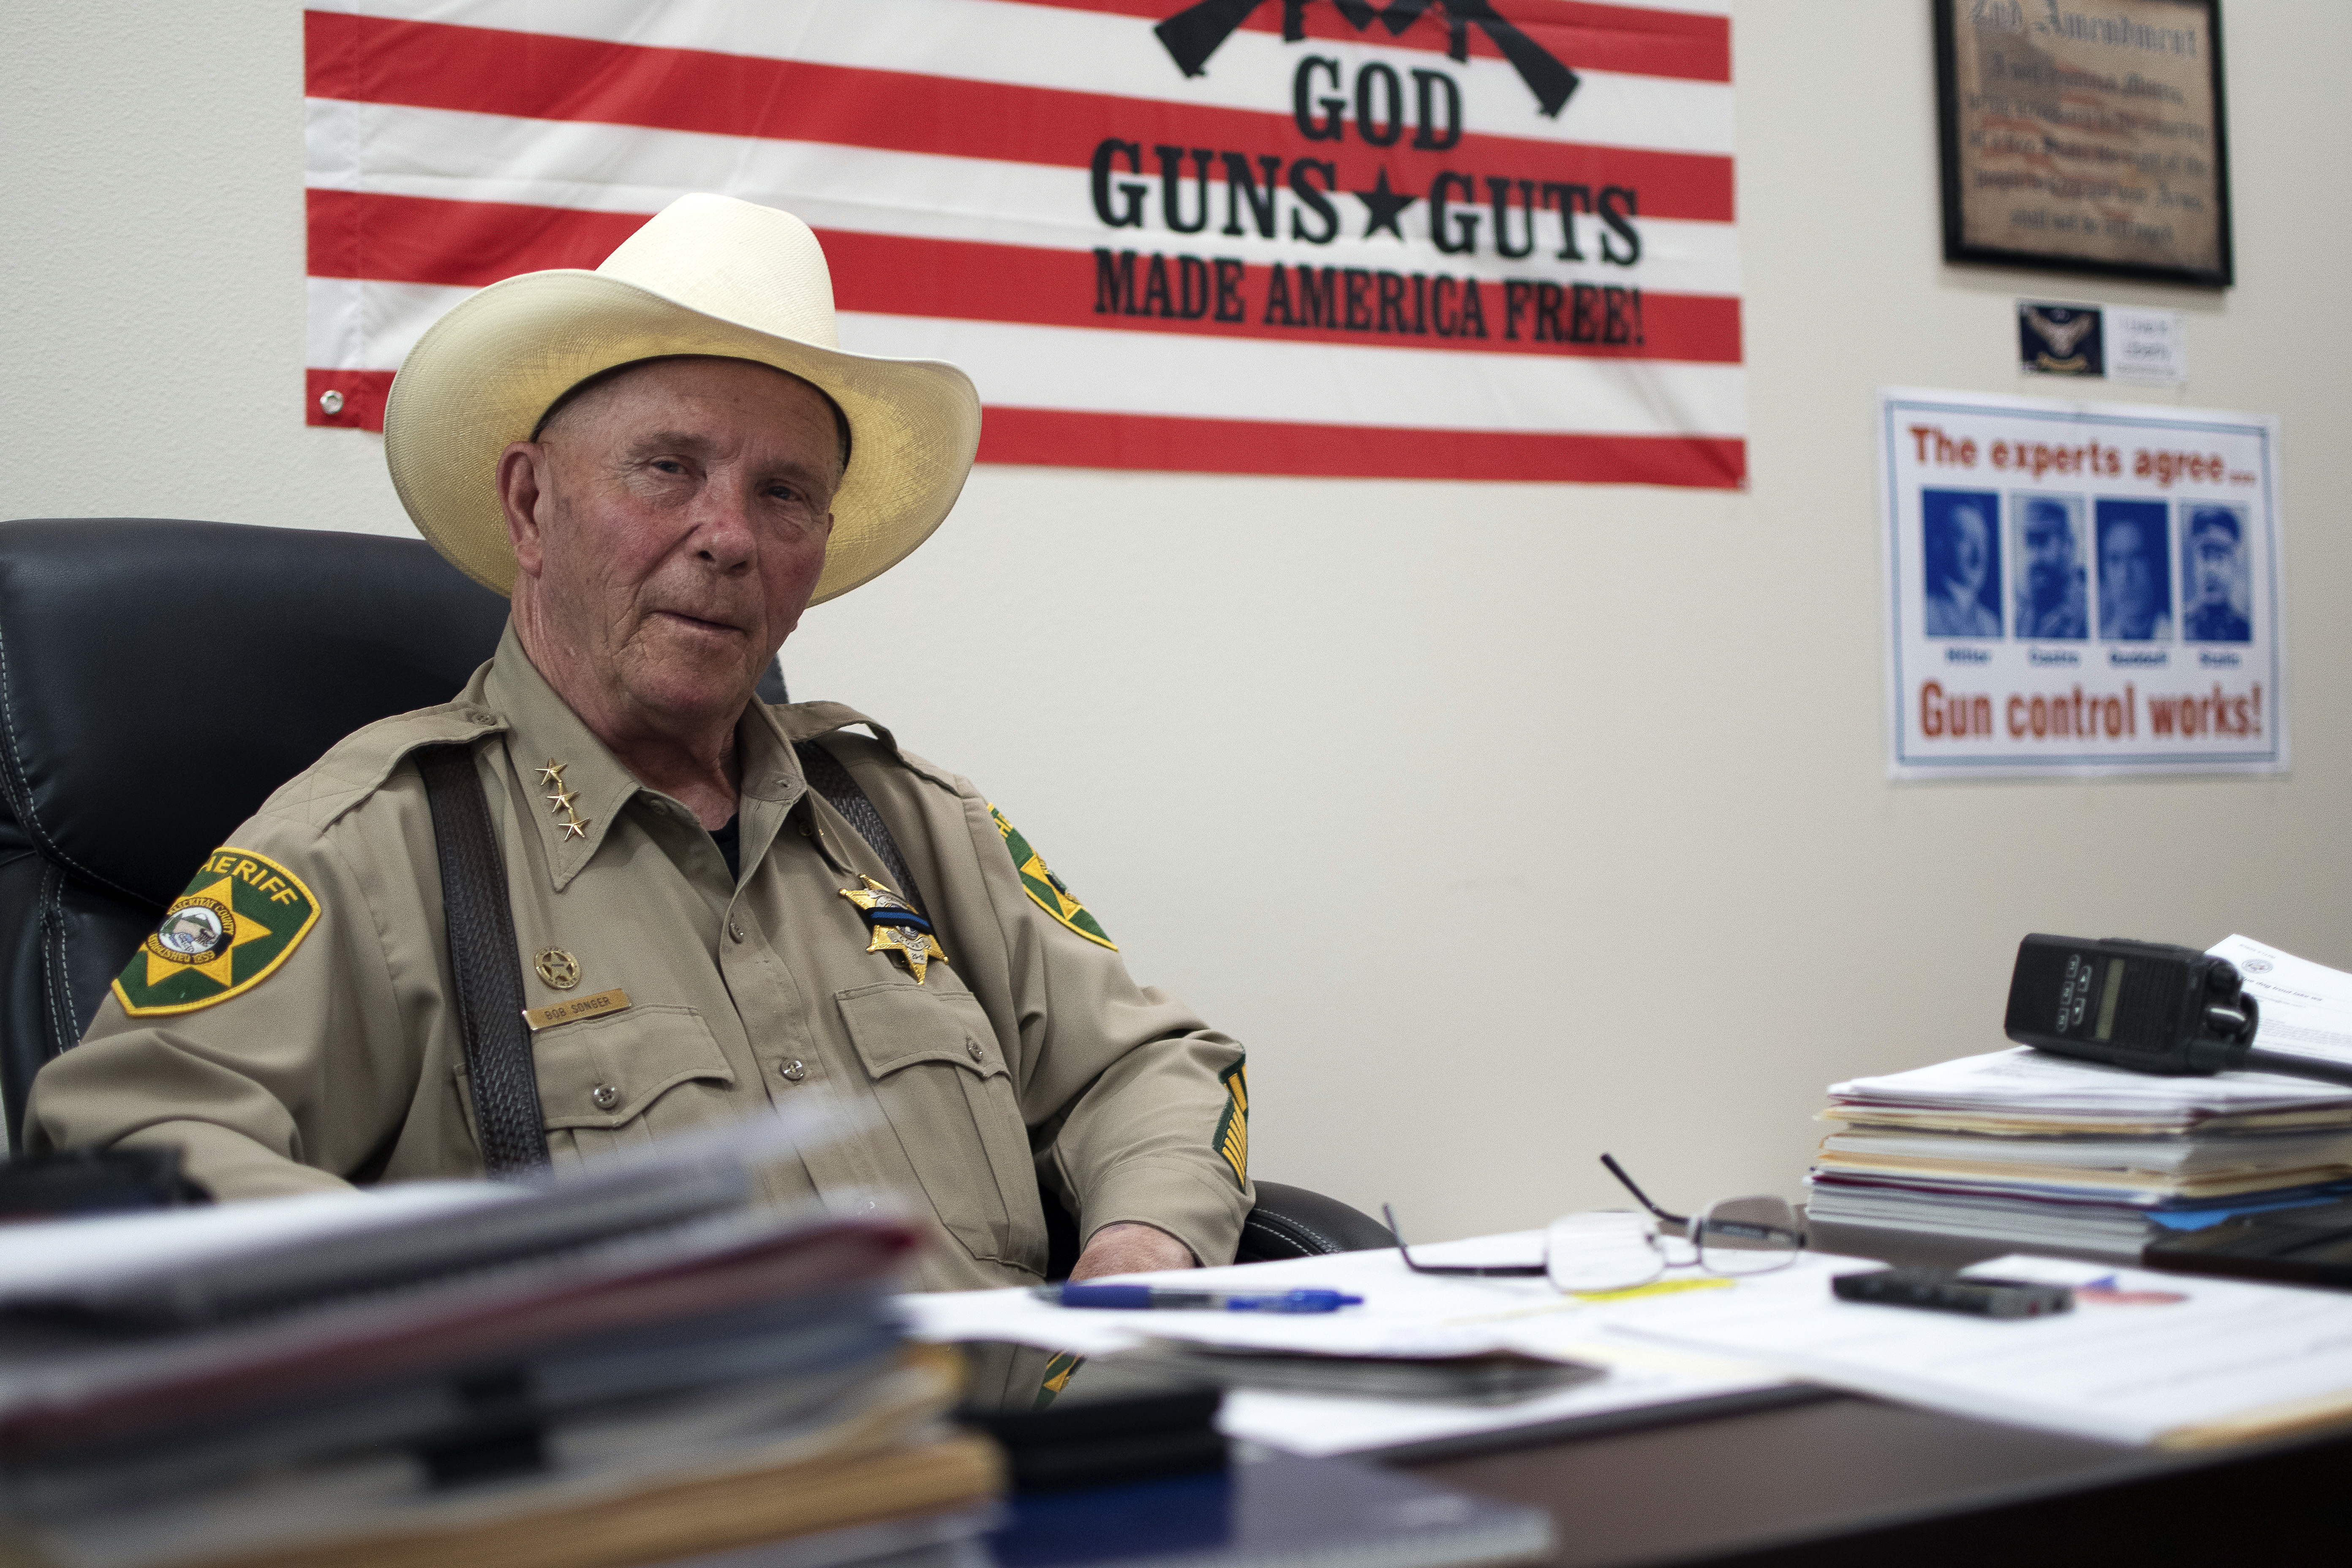 A right-wing sheriffs group that challenges federal law is gaining